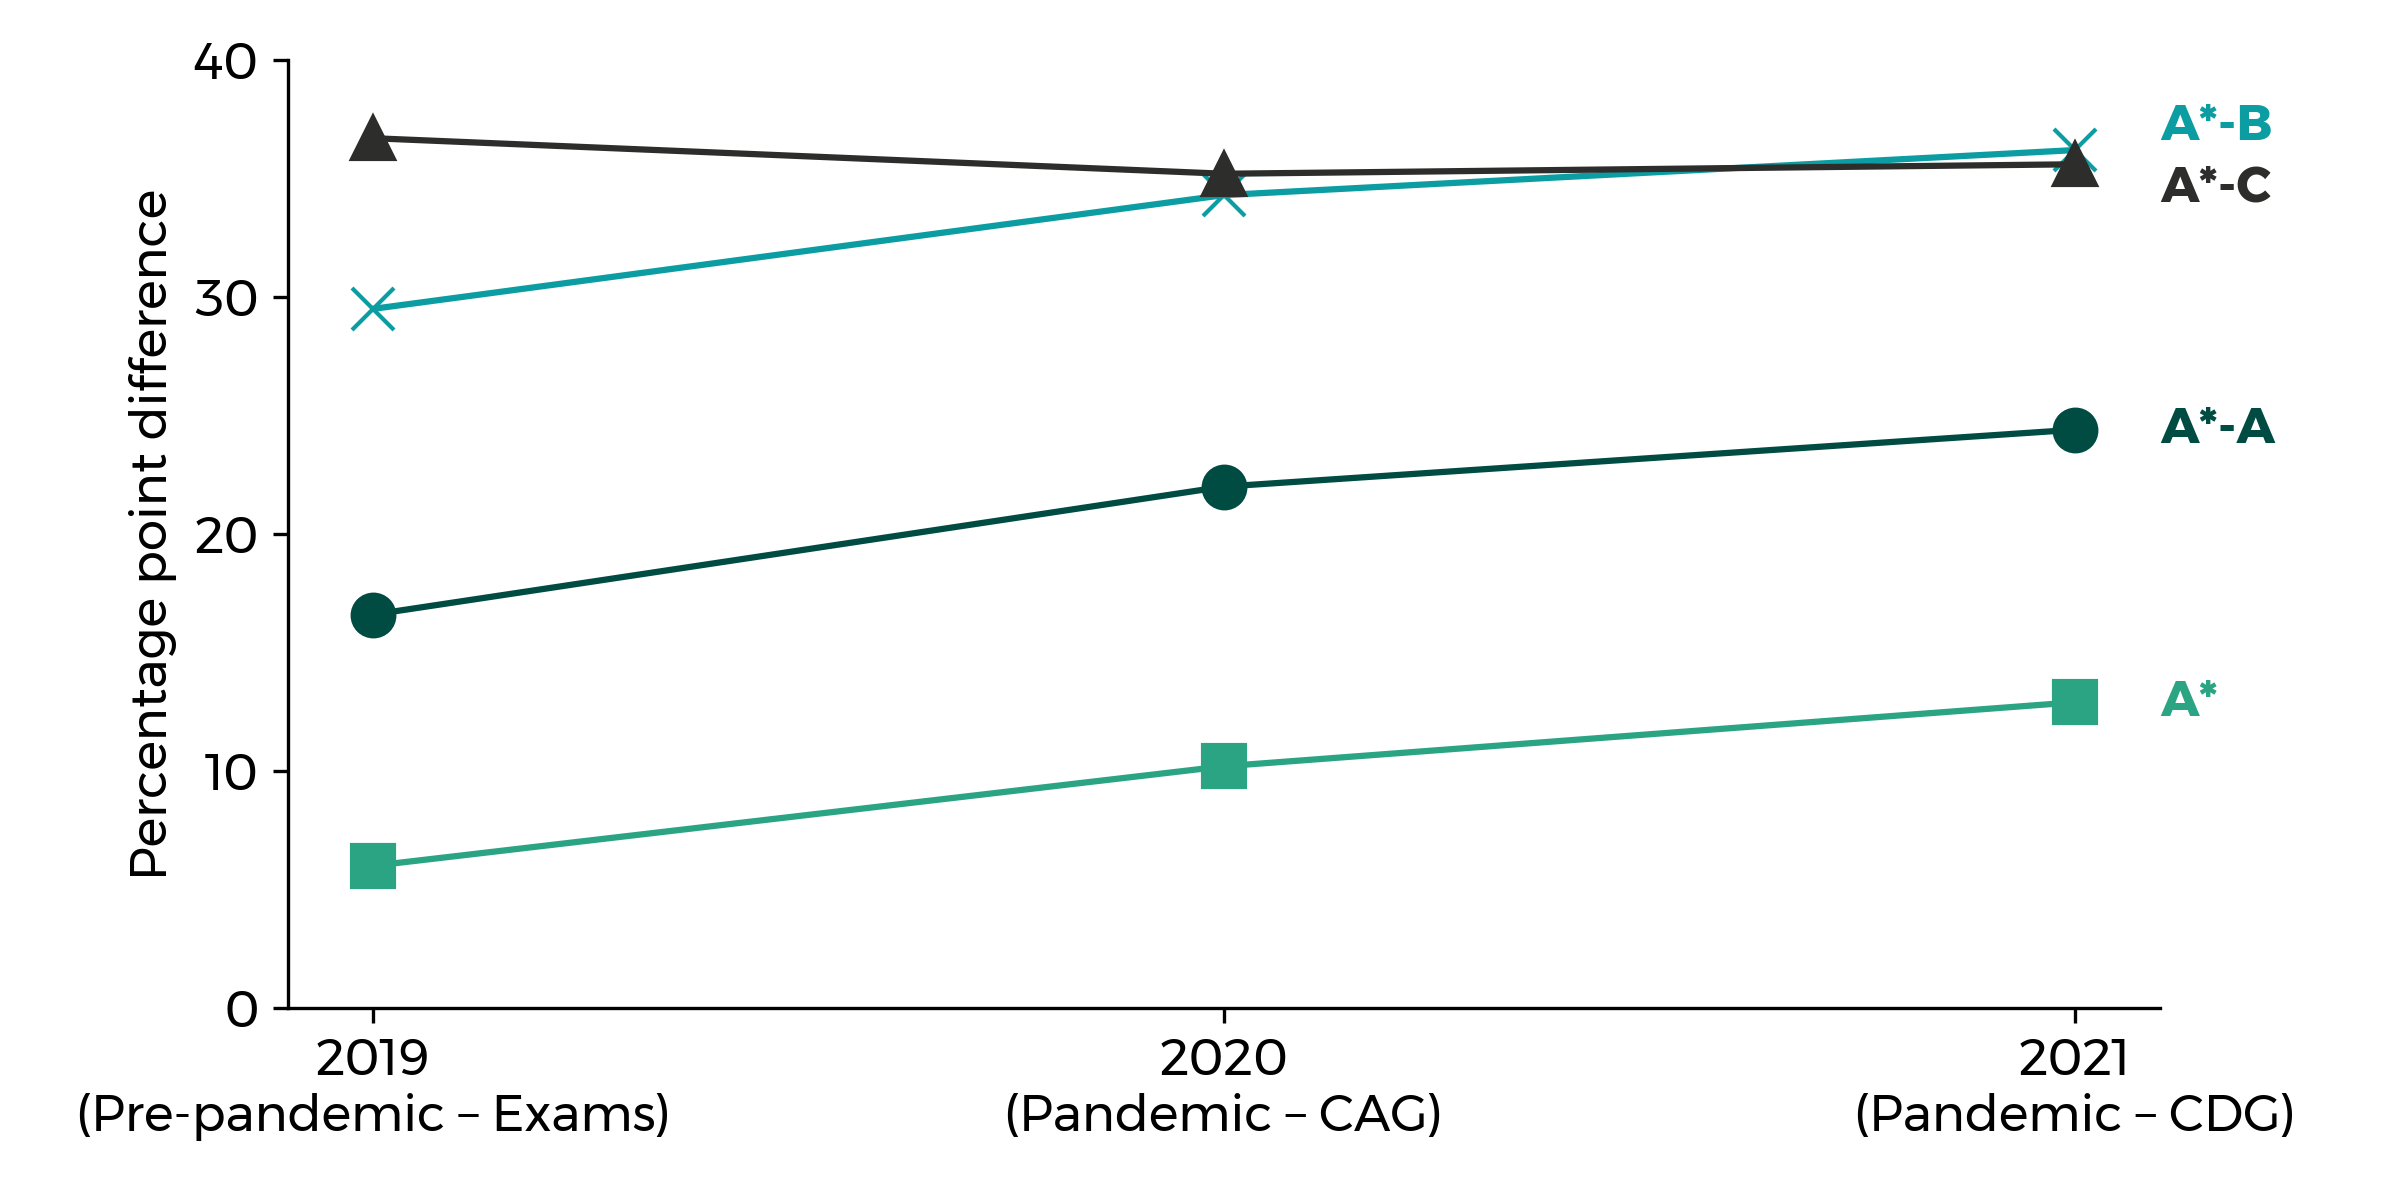 Graph showing how the Non SEN – SEN attainment gap has widened between 2019 and 2021 for achievement of the highest grades at GCSE during the pandemic. The gaps for grades A*, A*-A and A*-B have widened by 7, 8 and 7 percentage points respectively. For grades A*-C, it has narrowed by one percentage point.